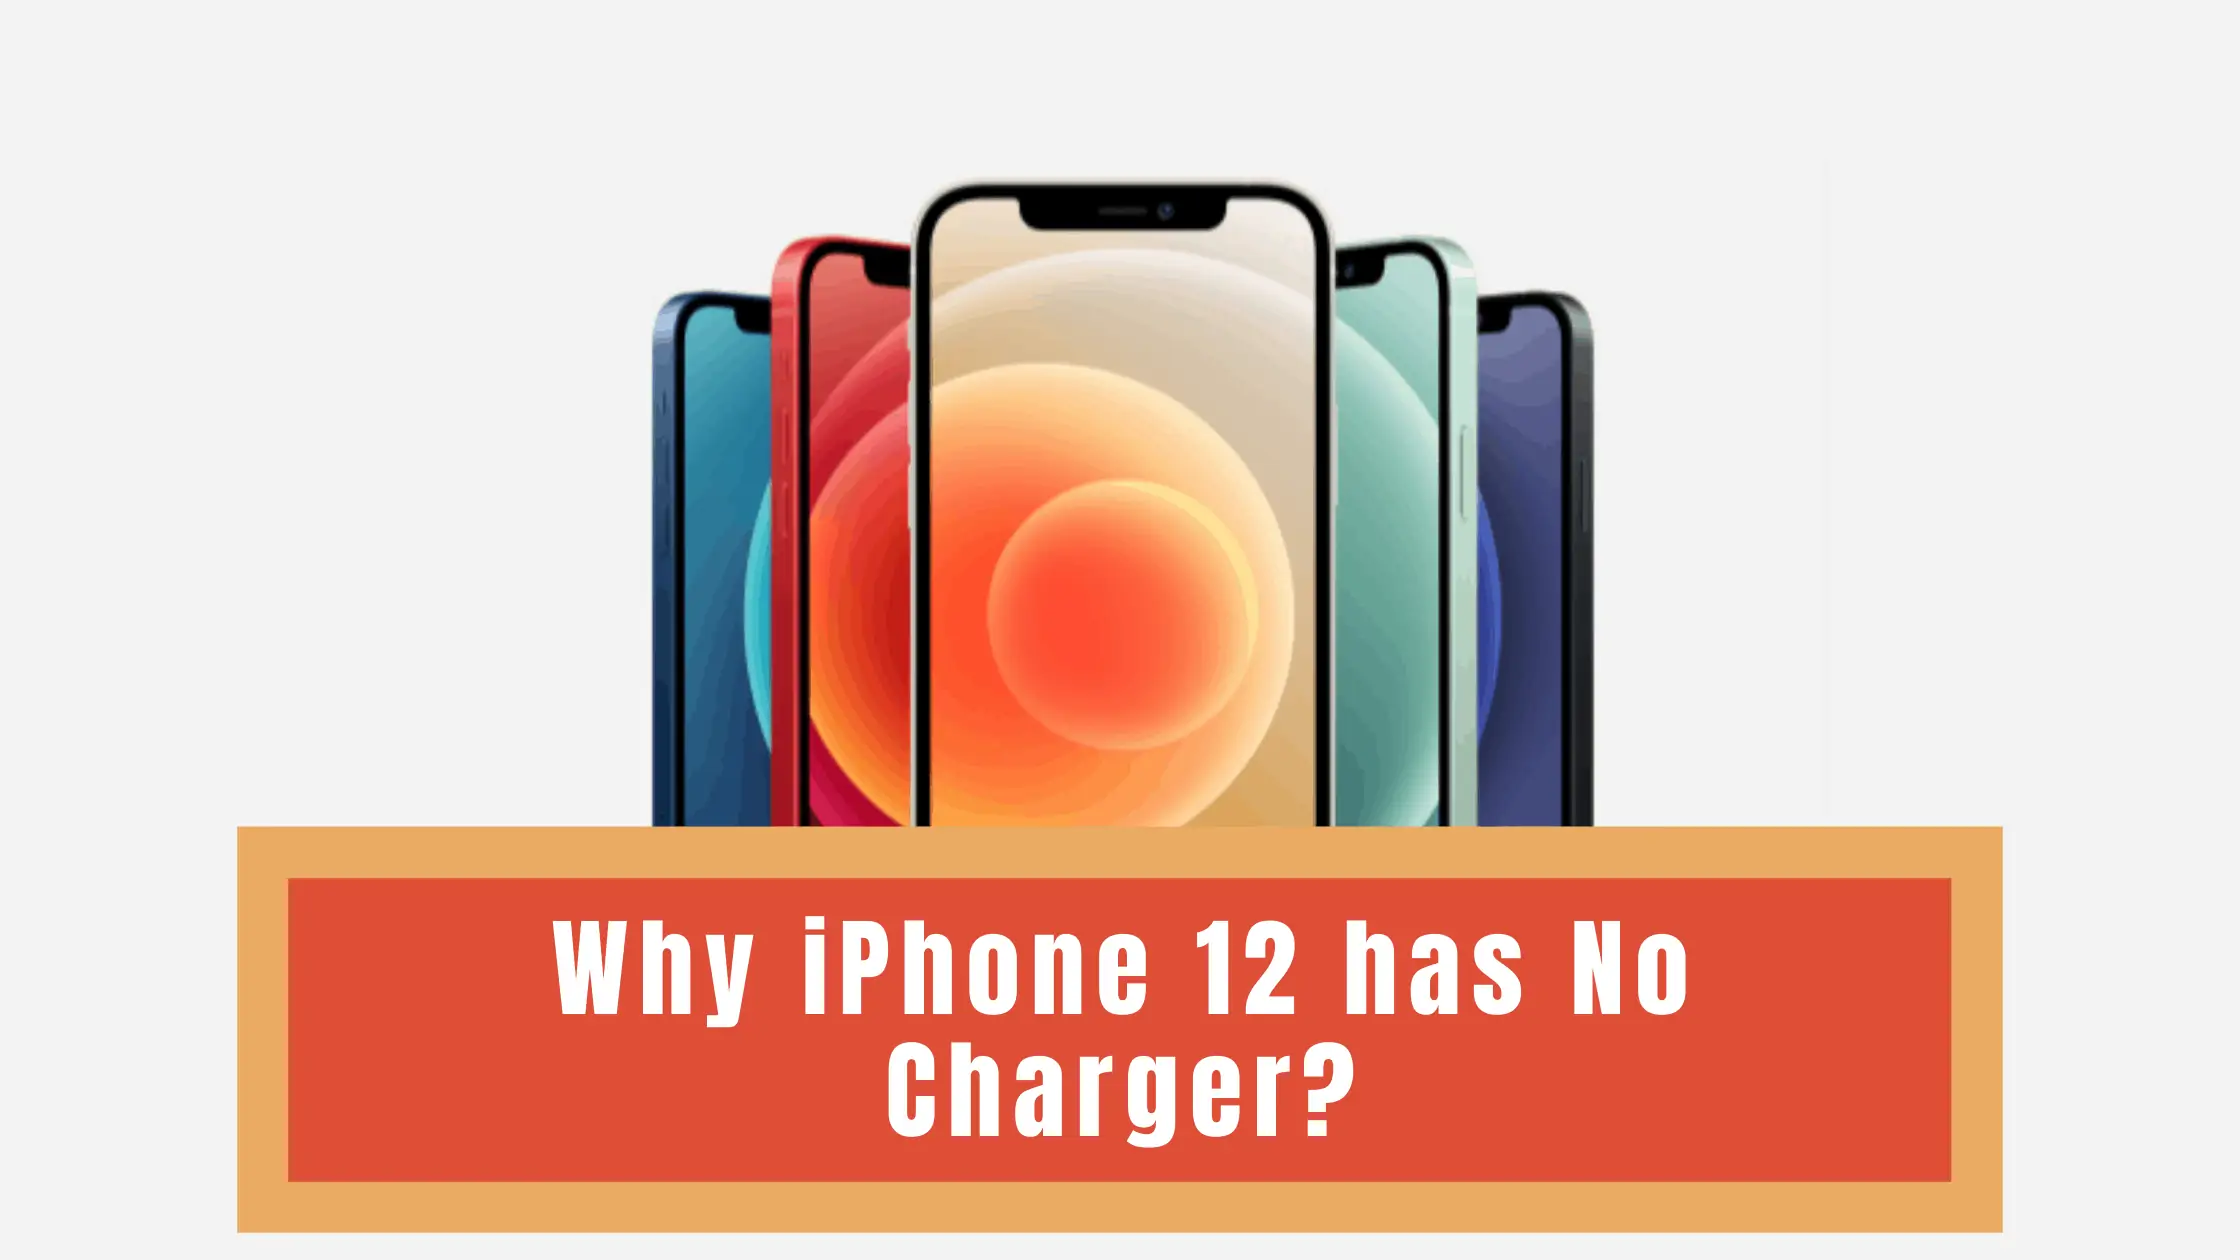 Why iPhone 12 has No Charger